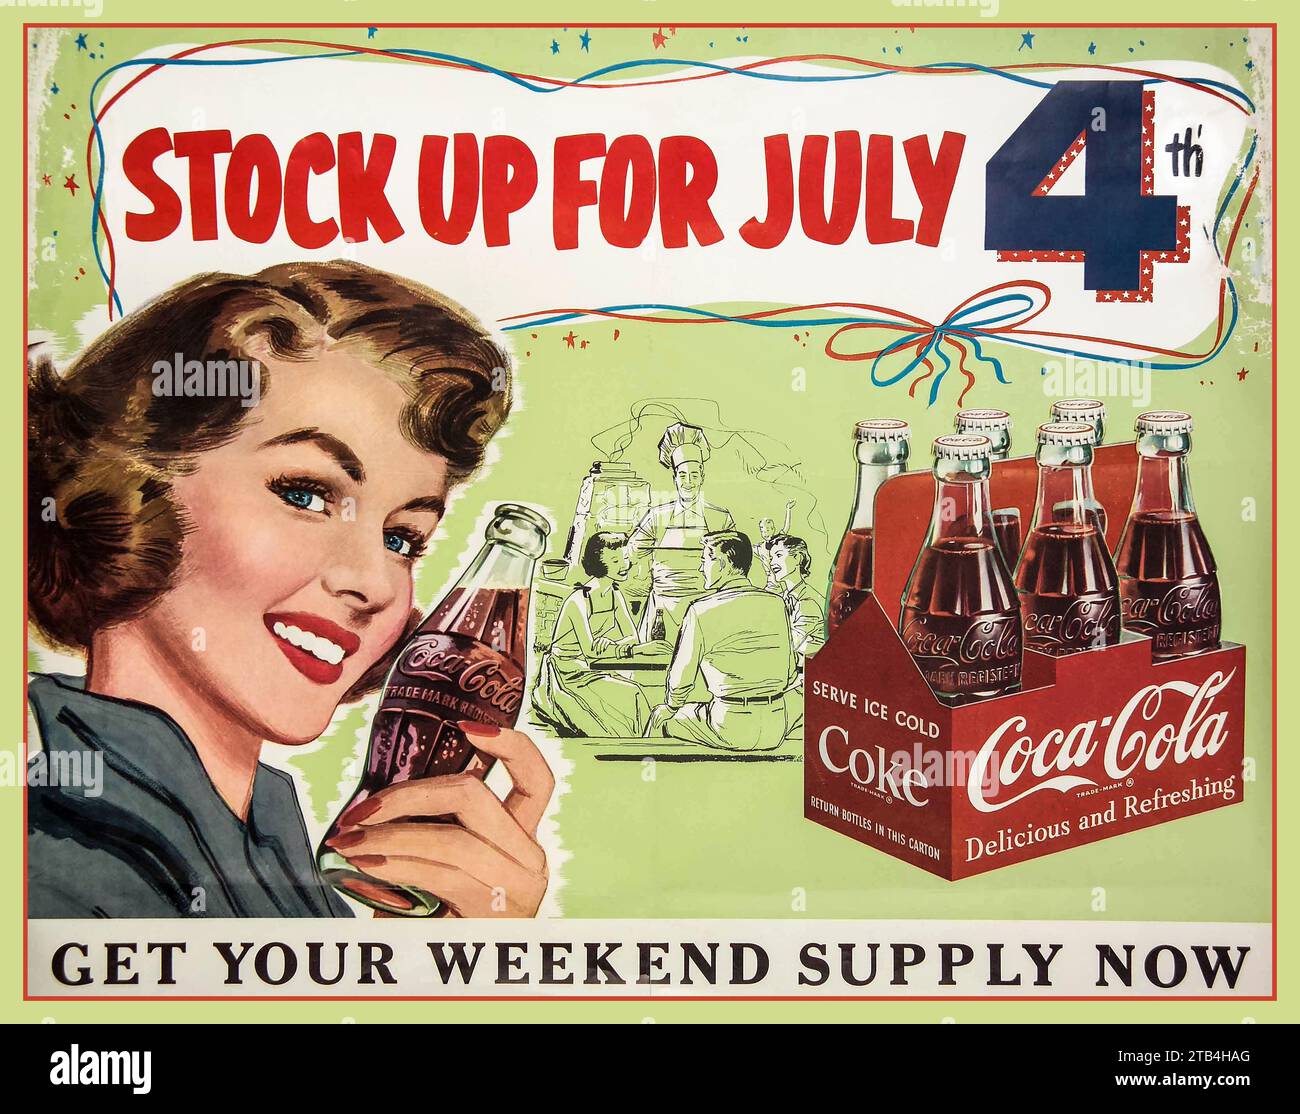 Vintage 1940s Coca Cola advertisement poster 'Stock up for July 4th, get your weekend supply now' Federal USA holiday celebrating Indepenence Day illustration advertisement America Americana USA Stock Photo